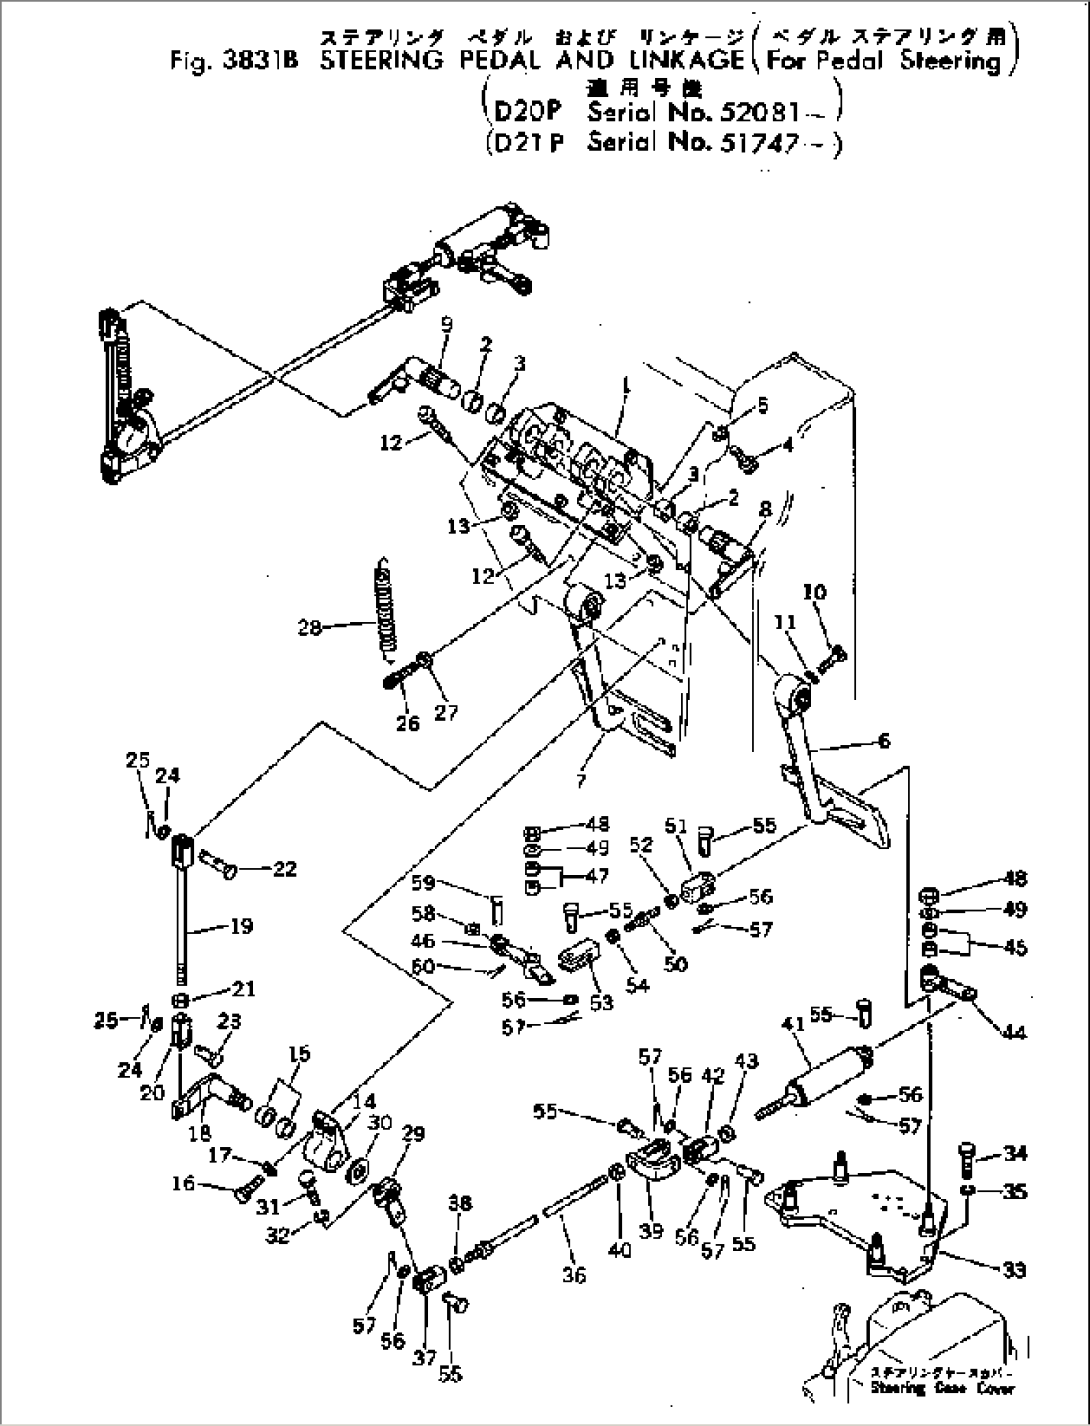 STEERING PEDAL AND LINKAGE (FOR PEDAL STEERING)(#52081-)